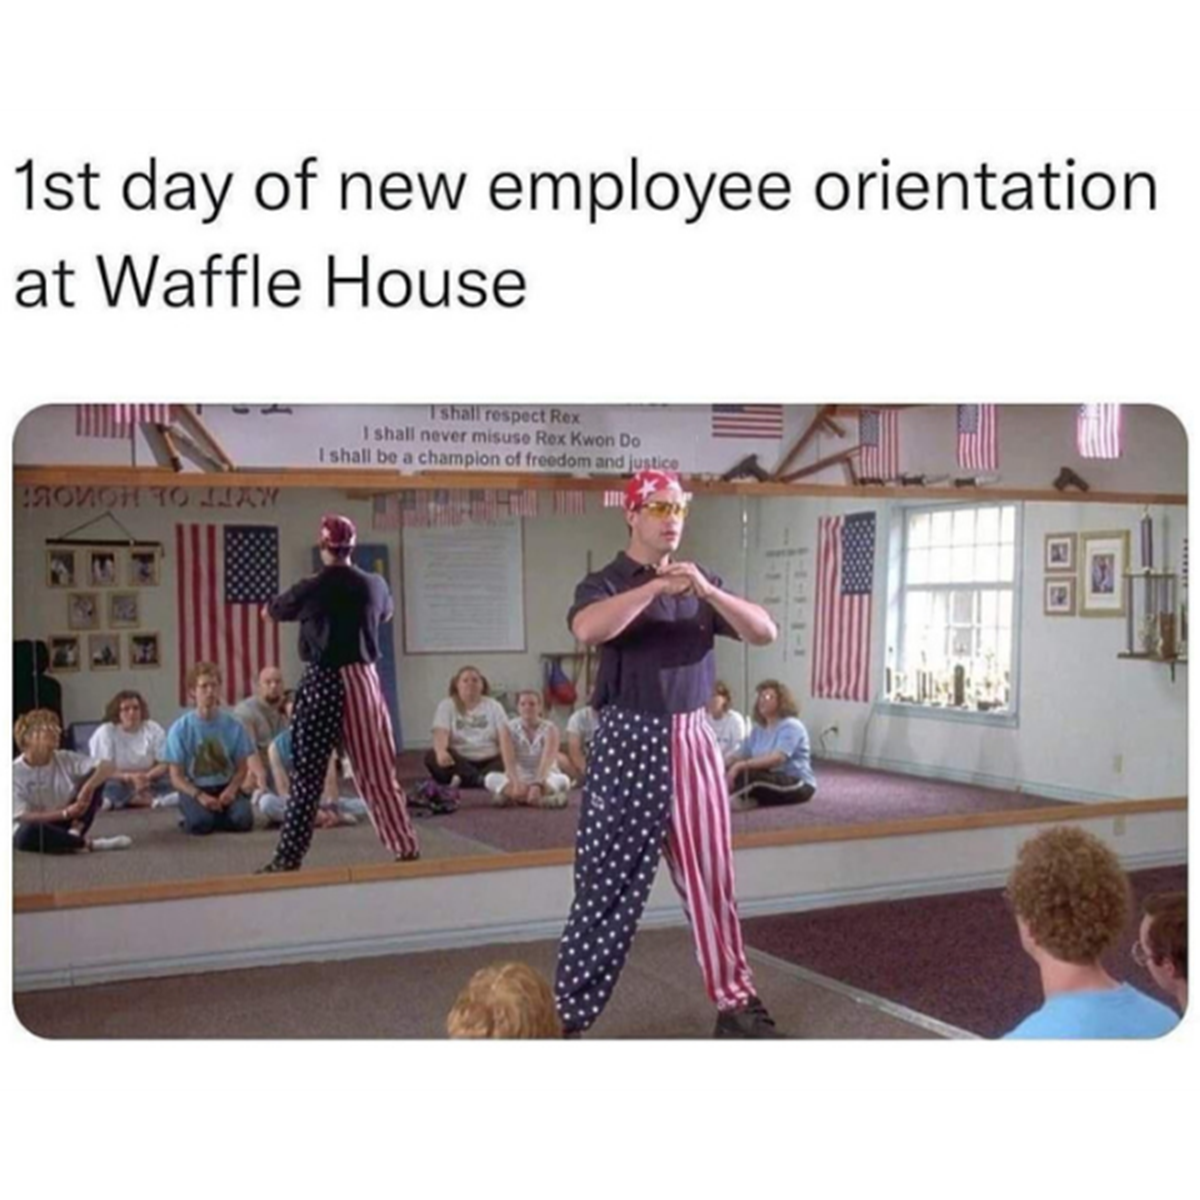 rex kwon do - 1st day of new employee orientation at Waffle House 1 shall never misuse Rax Kwon Do I shall be a cham and justice